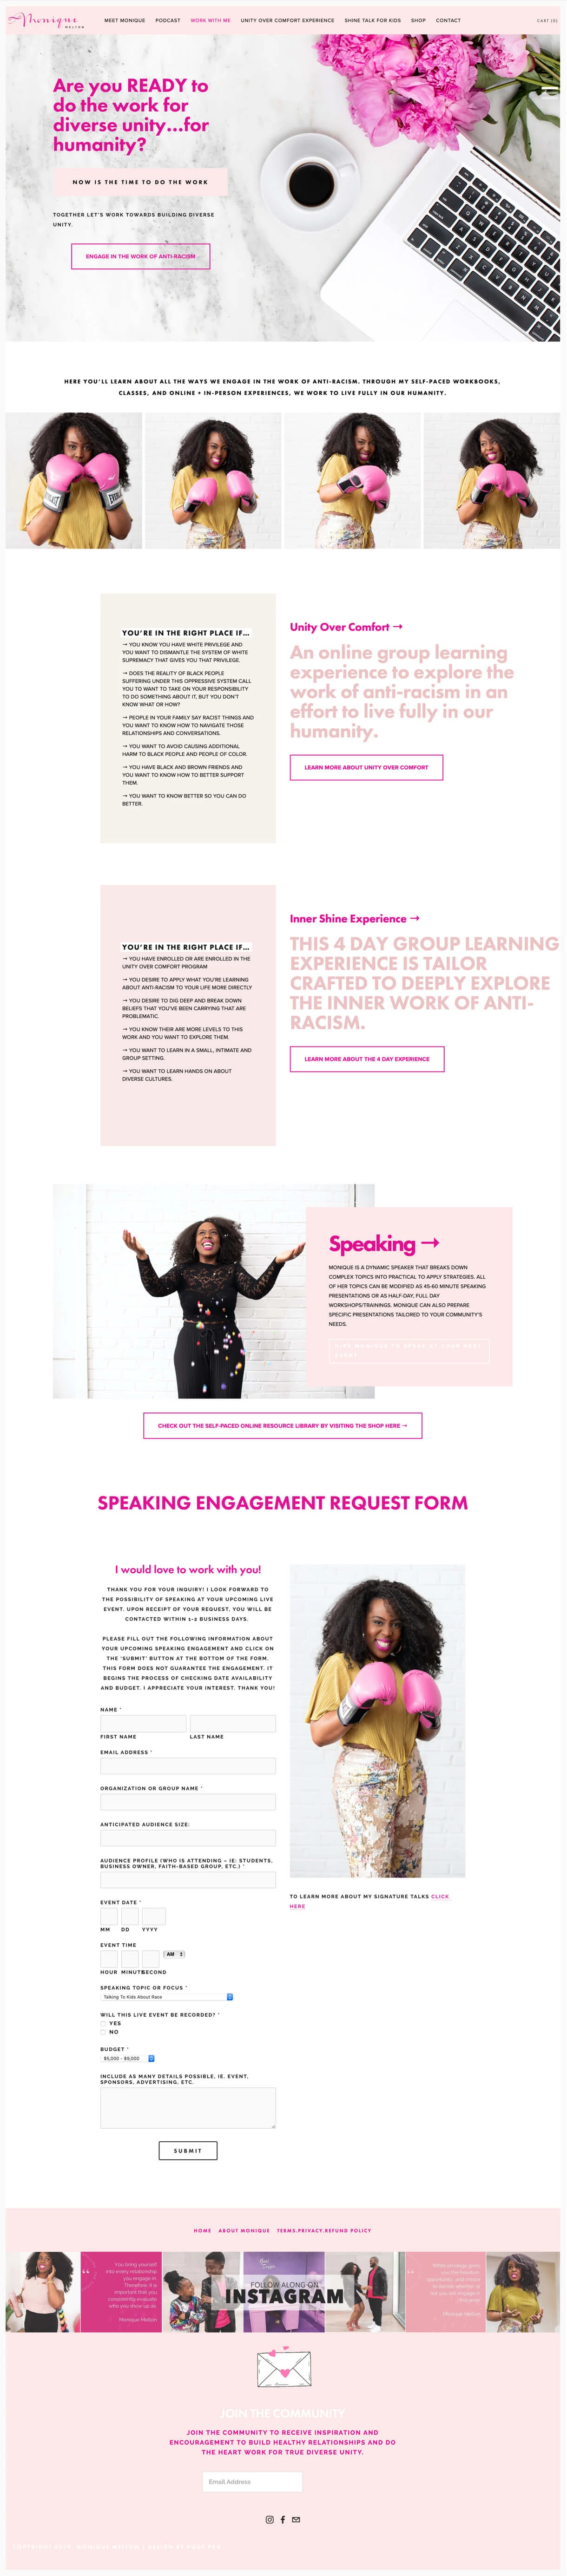 Monique Melton services web page example light pink and white branding colors